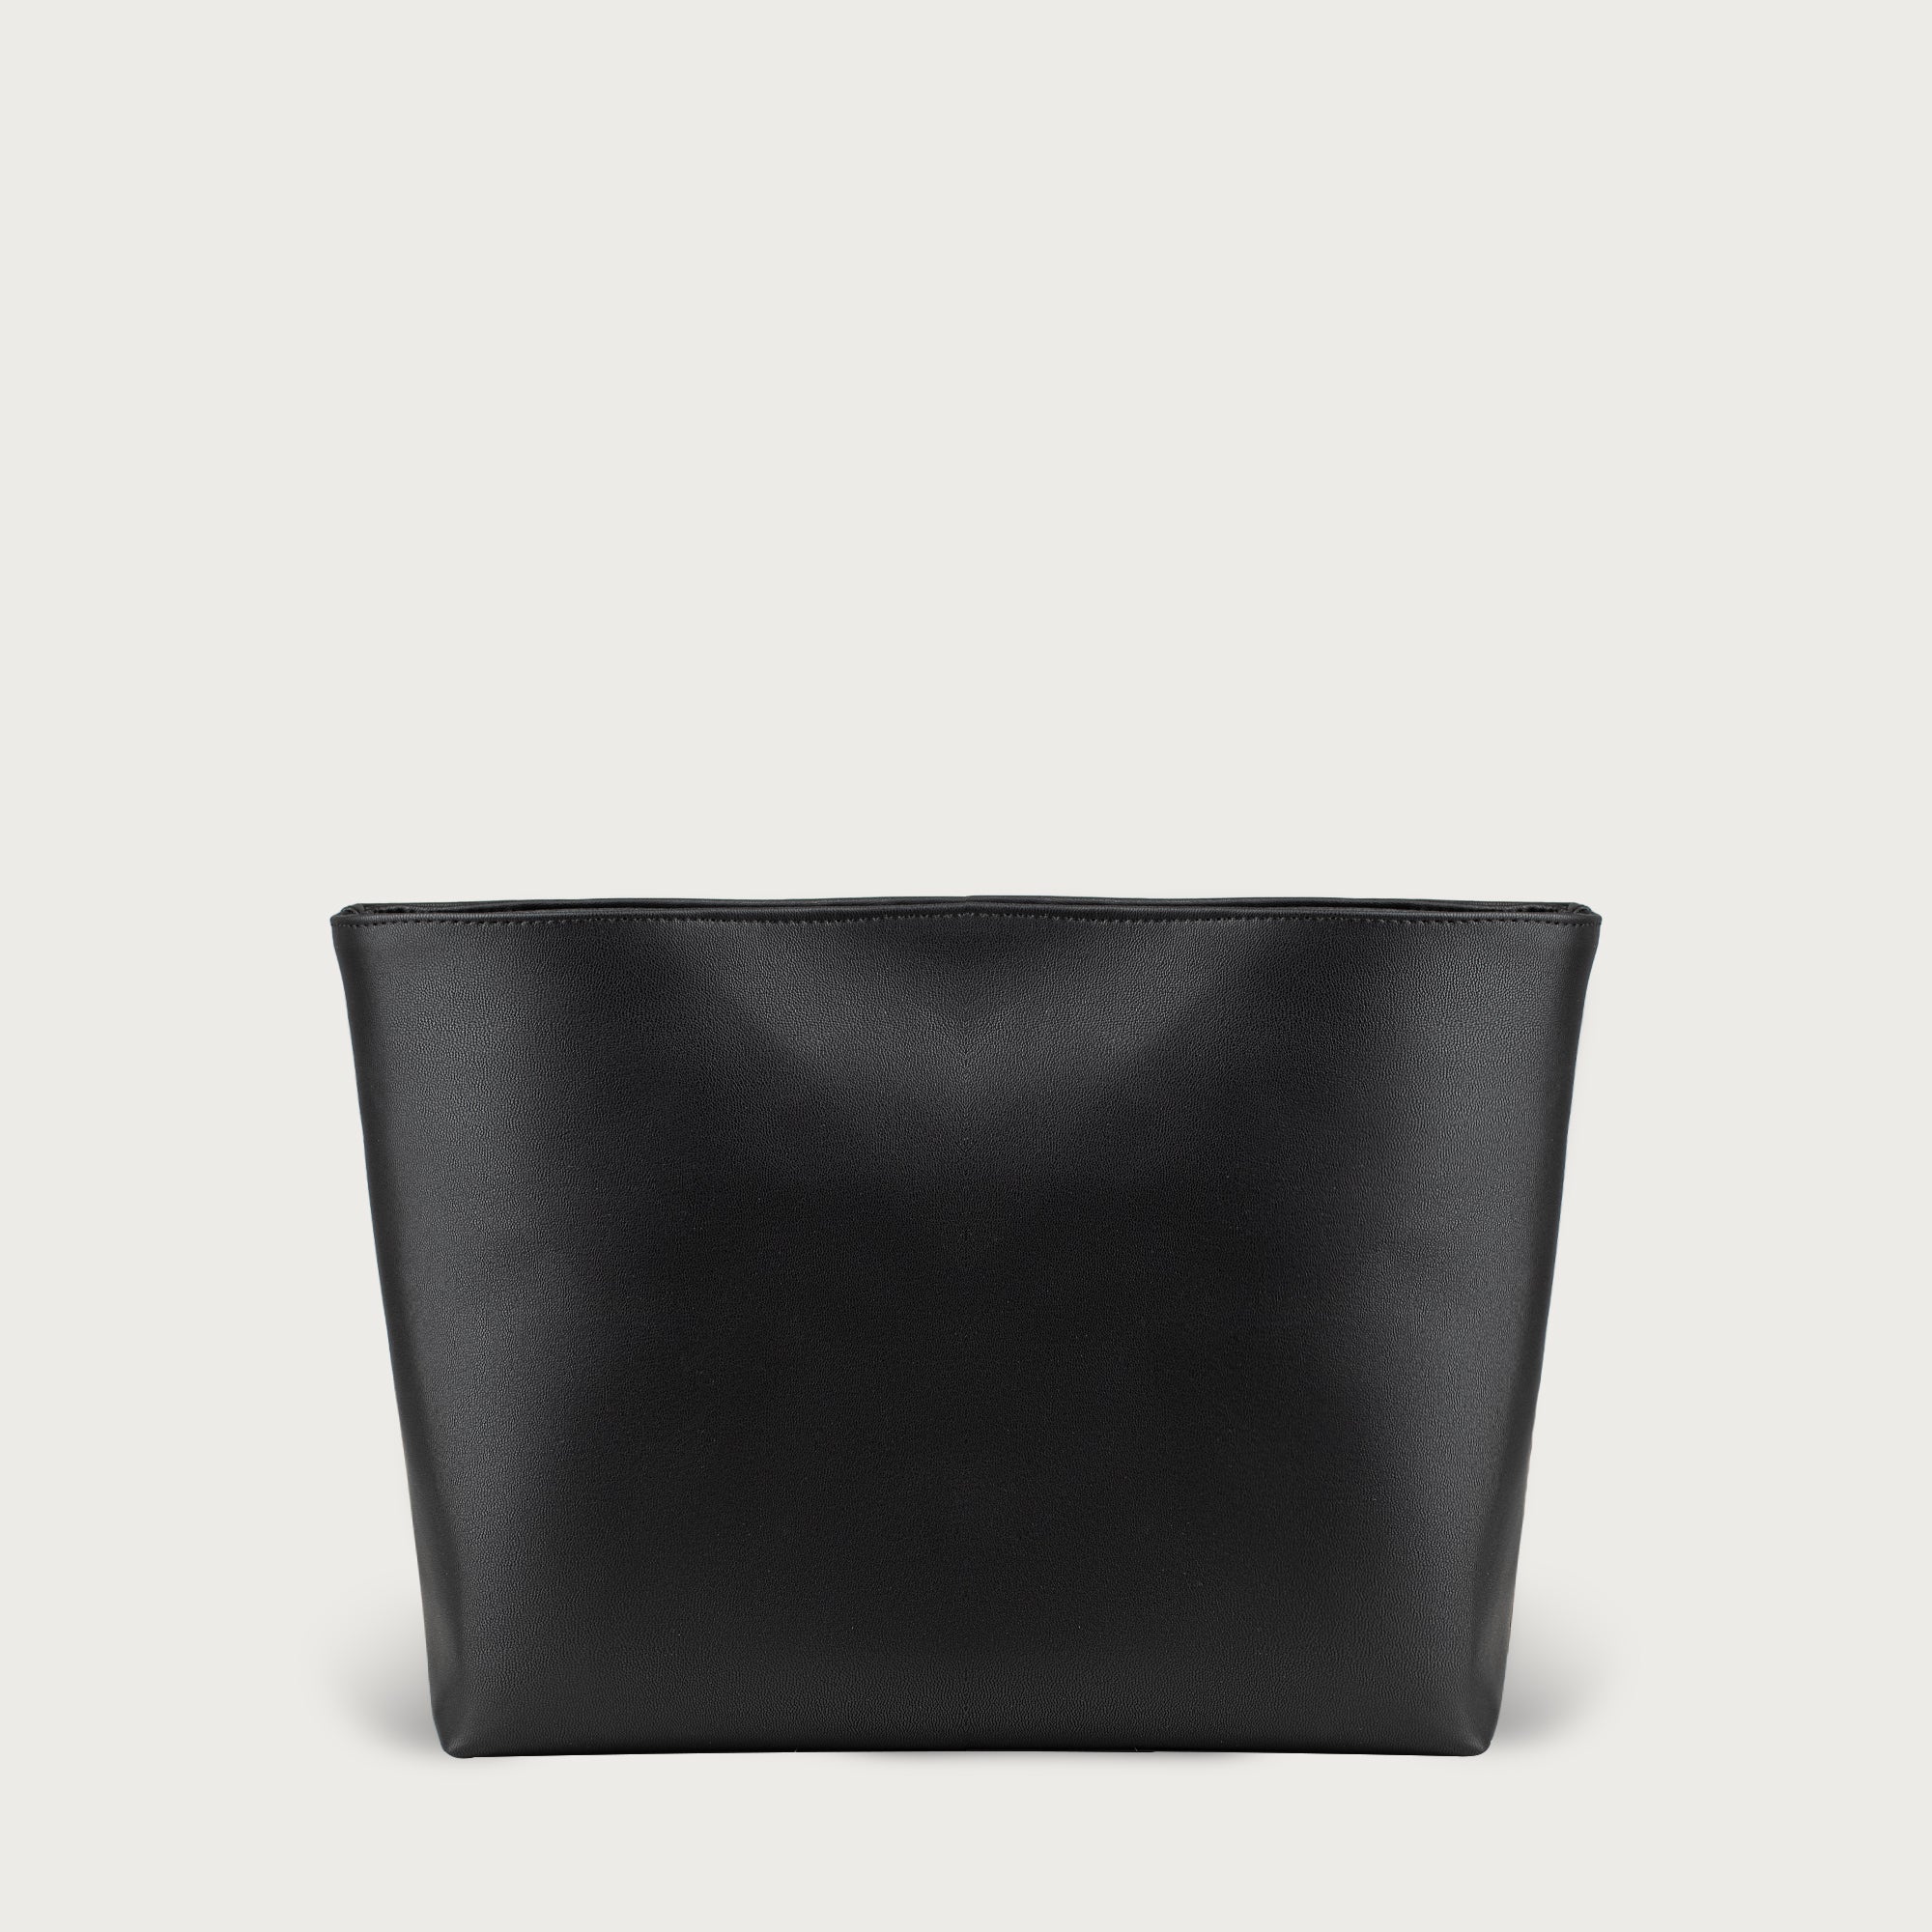 The Signature Bag, Your Clutch Purse Organizer Solution in Vegan, Leather-Like Style and Comfort Luxe with Gold Hardware